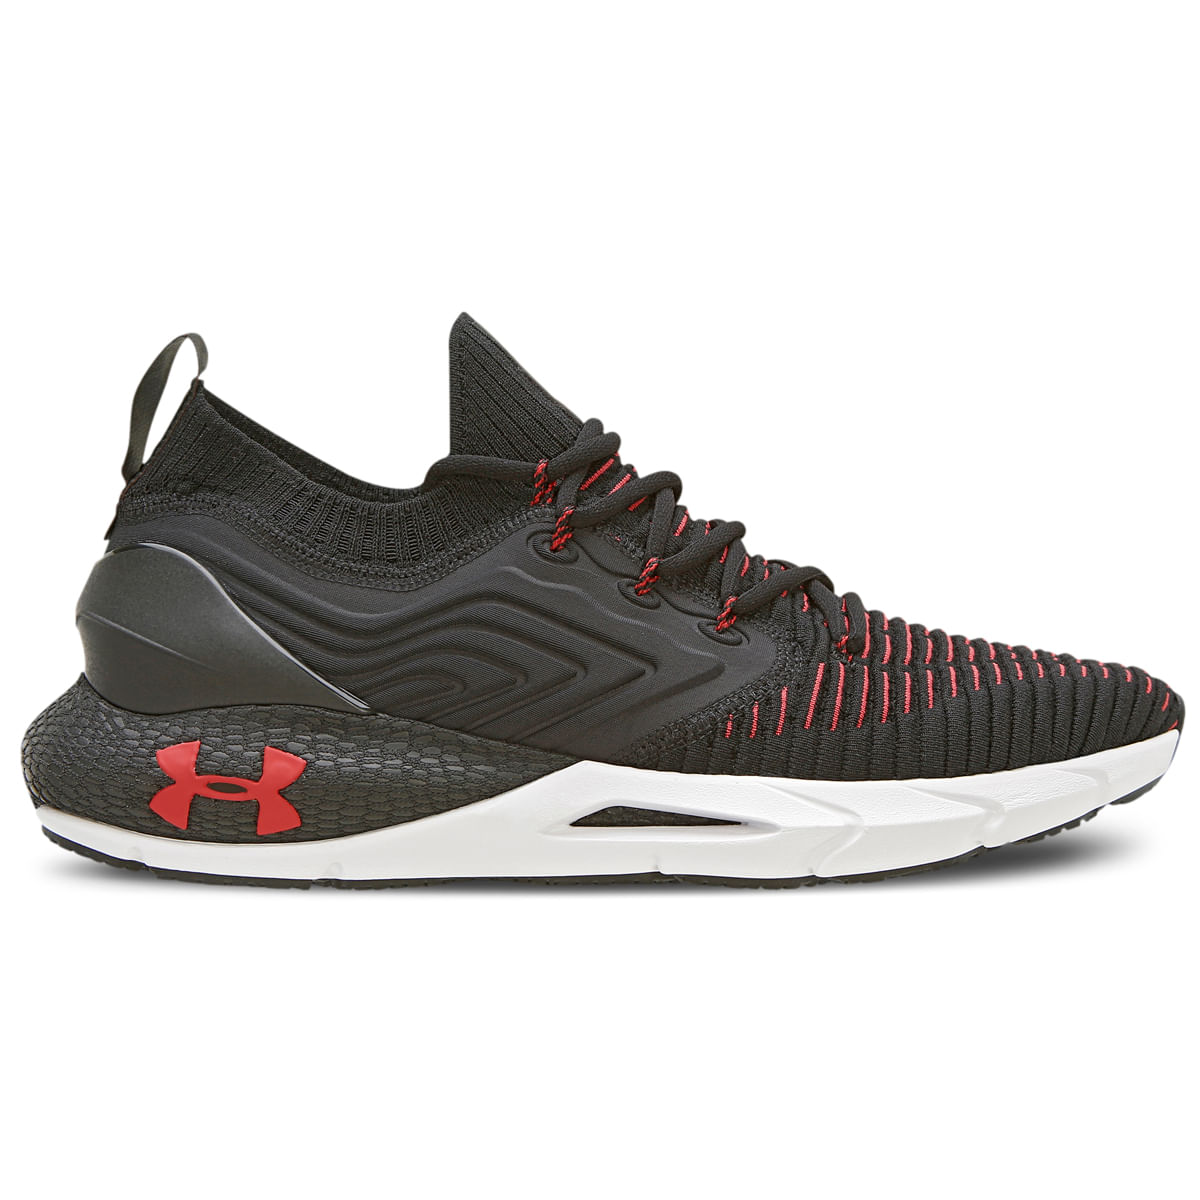 Under Armour HOVR Phantom 3 Black History Month Running Shoes